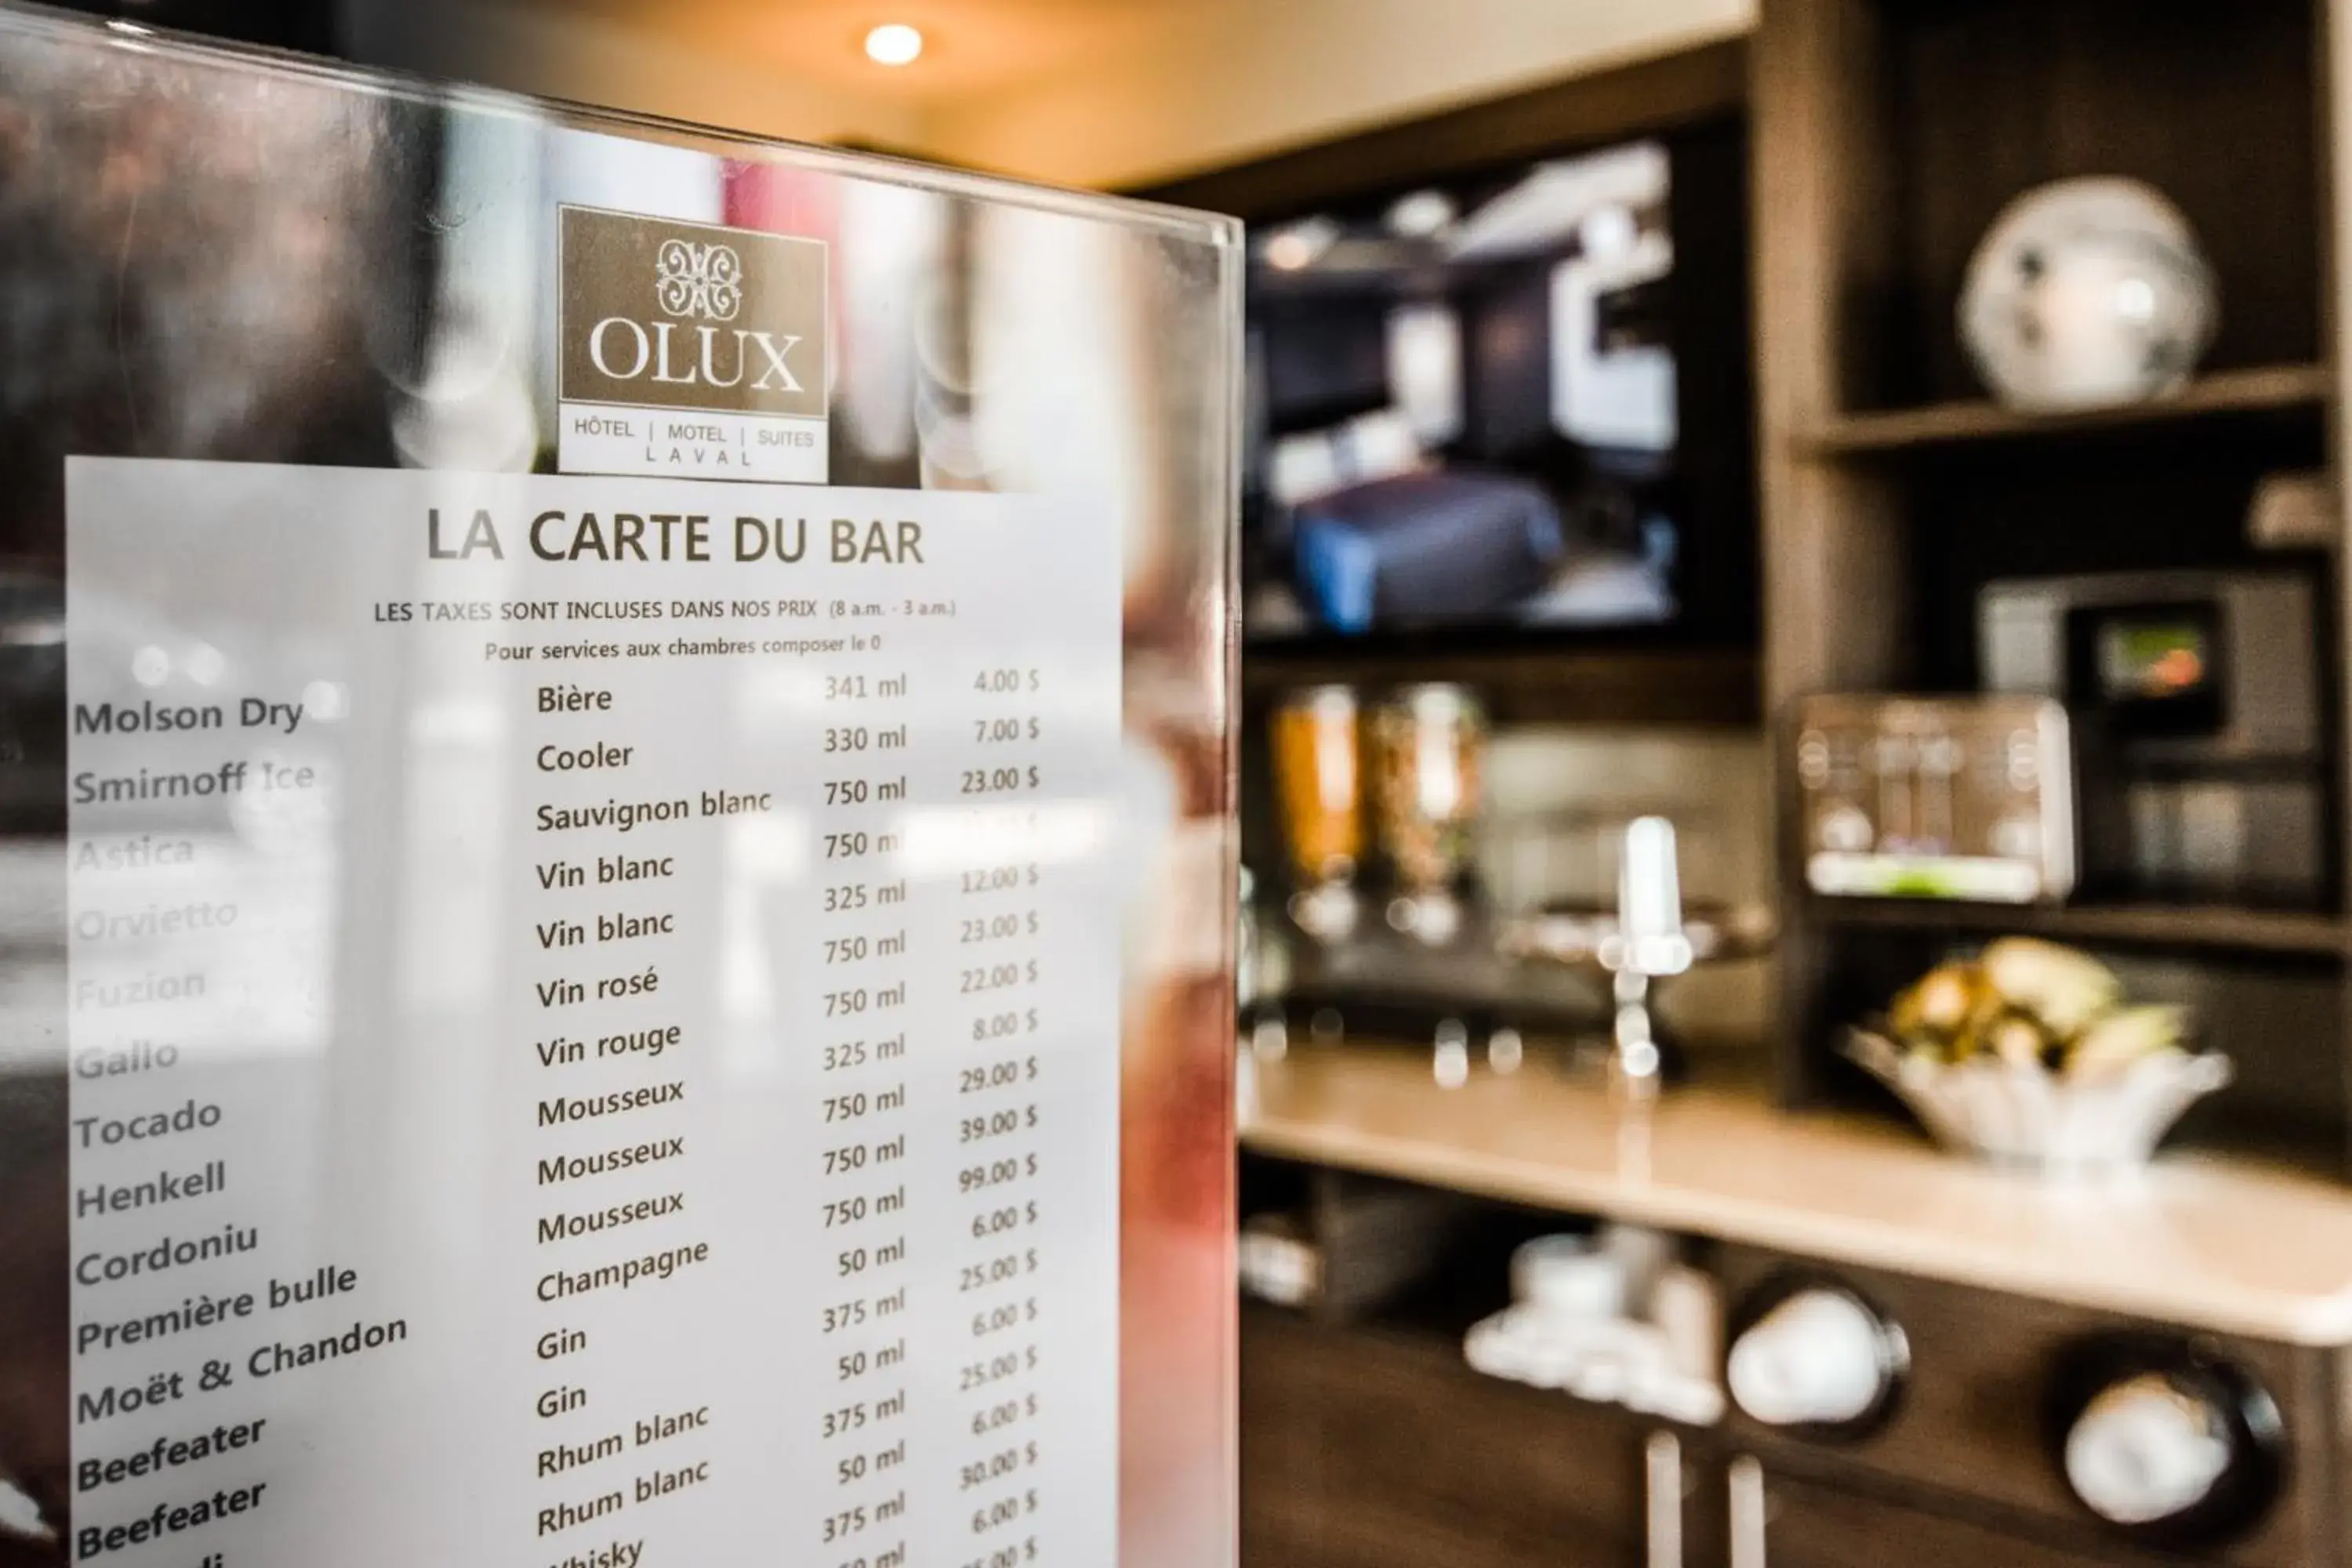 Lobby or reception in Olux Hotel-Motel-Suites